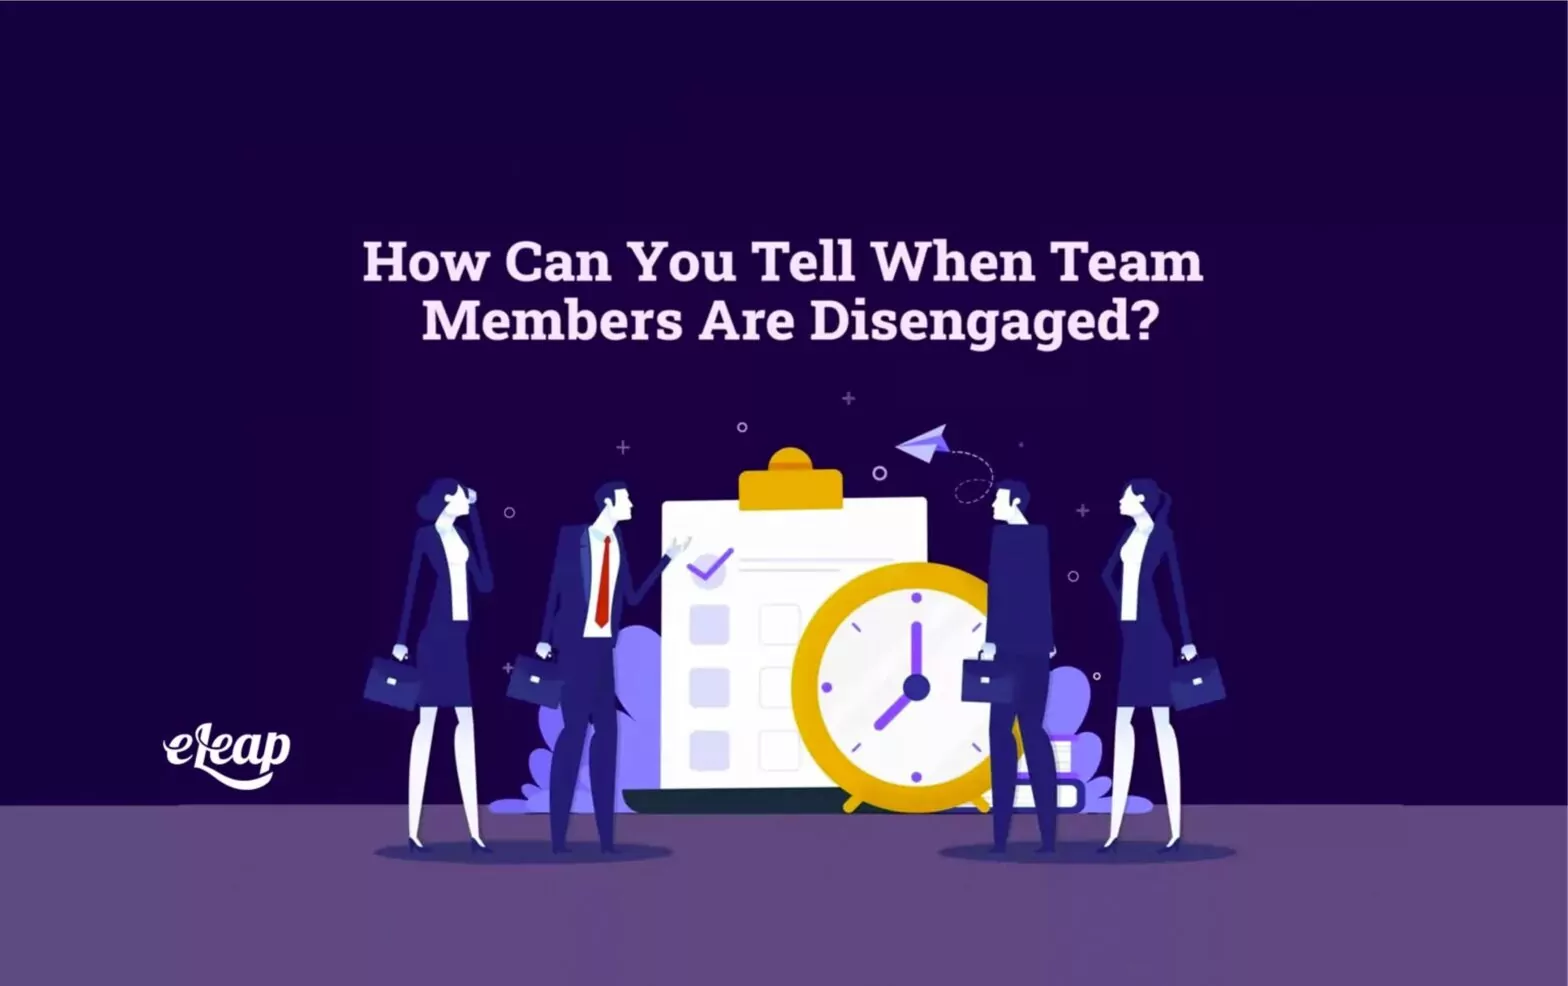 How Can You Tell When Team Members Are Disengaged?